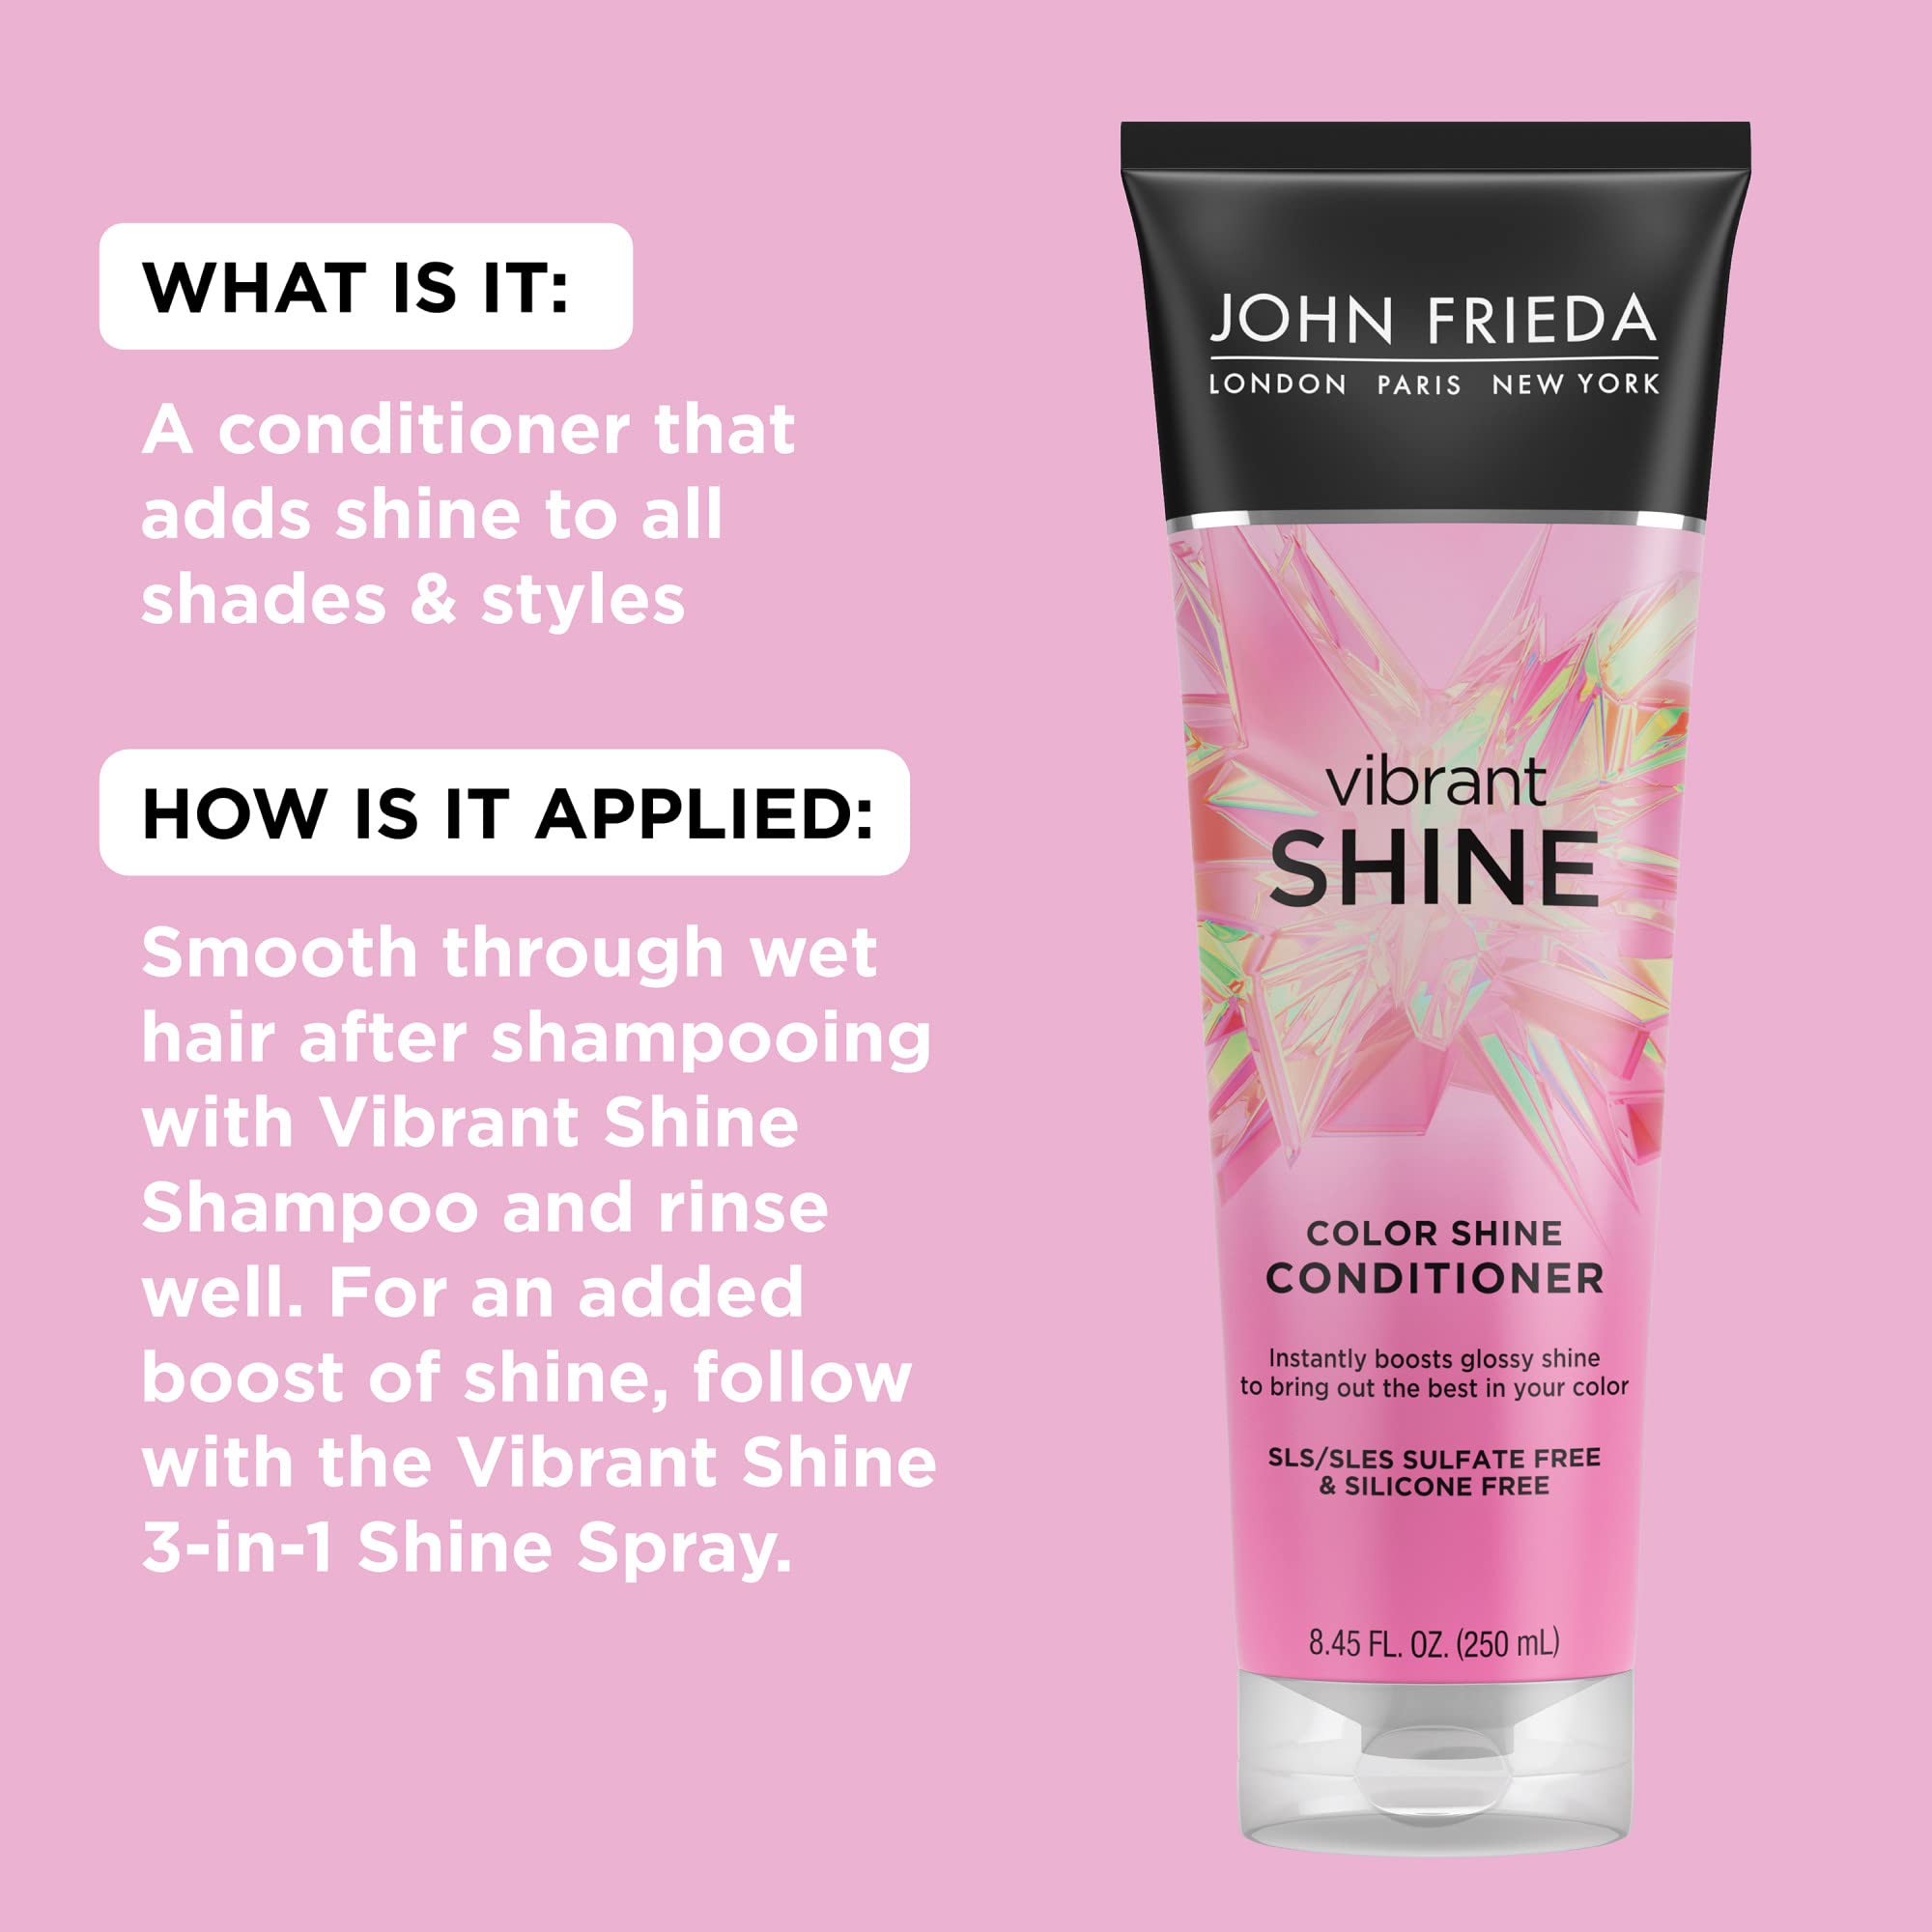 John Frieda Vibrant Shine Conditioner with Rosehip Oil, Hydrating Conditioner for Glossy, Shiny Hair, SLES/SLS Sulfate-Free and Paraben-Free, 8.45 Ounce